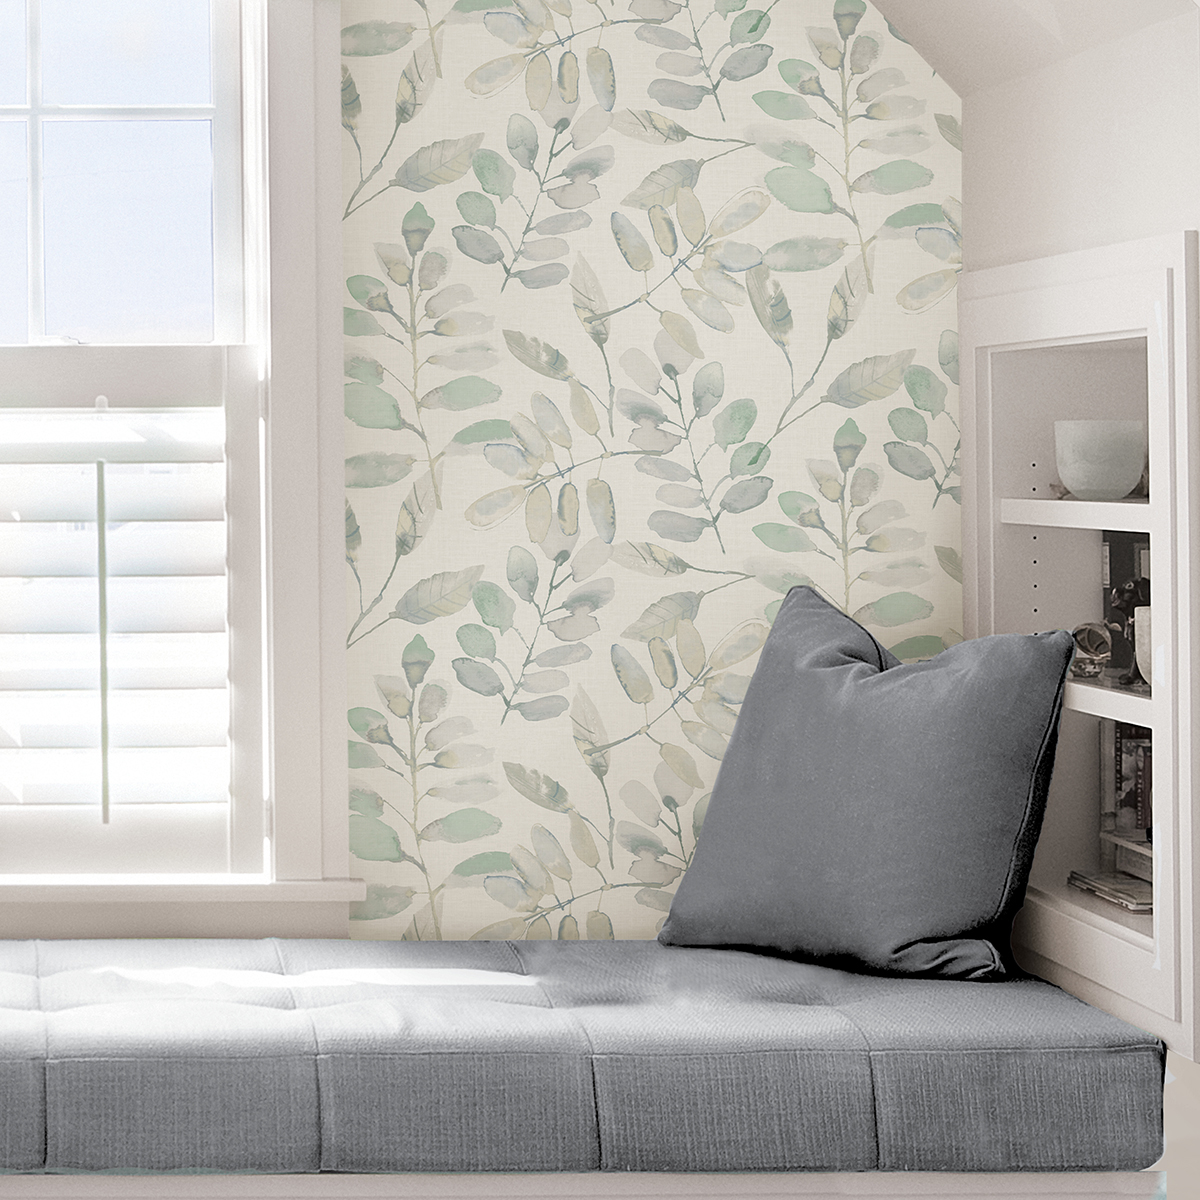 NHS3764 - Fable Leaf Peel and Stick Wallpaper - by InHome